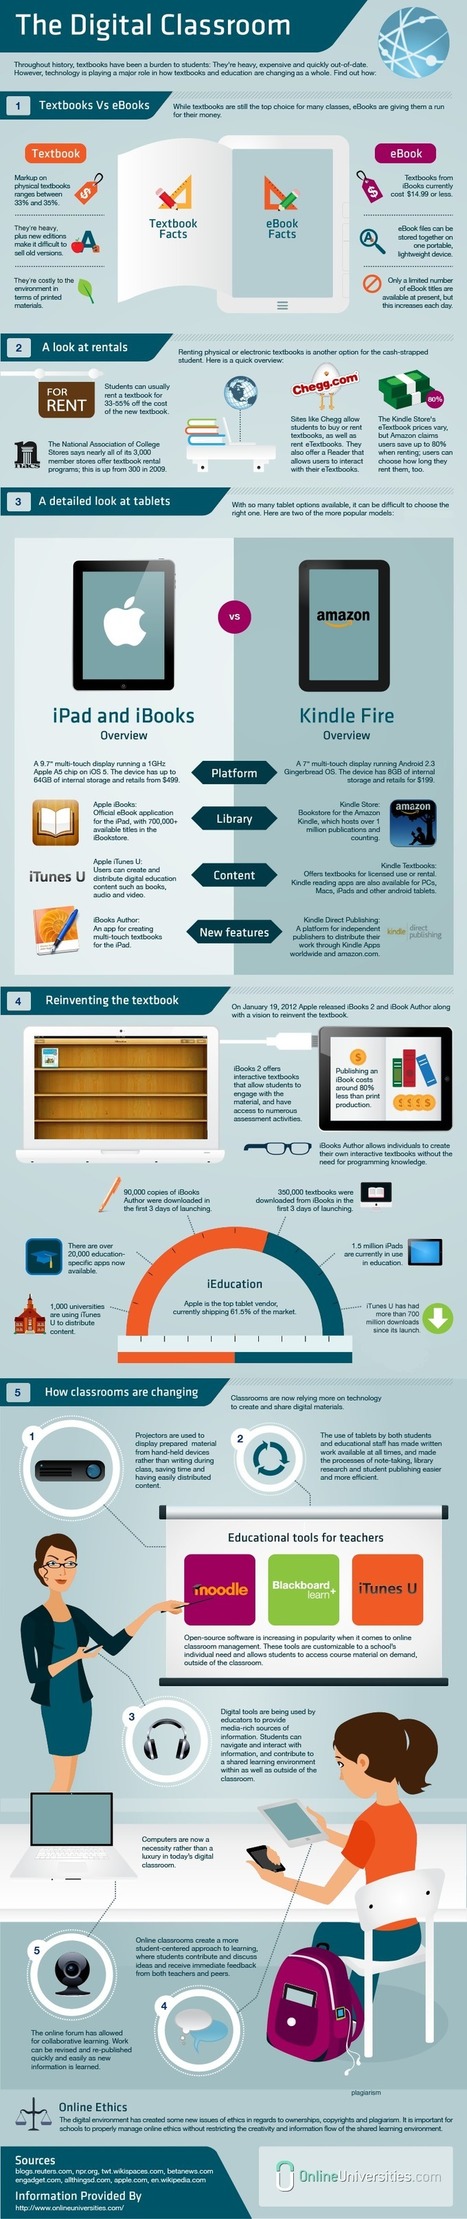 The Elements Of A Digital Classroom [Infographic] | 21st Century Learning and Teaching | Scoop.it